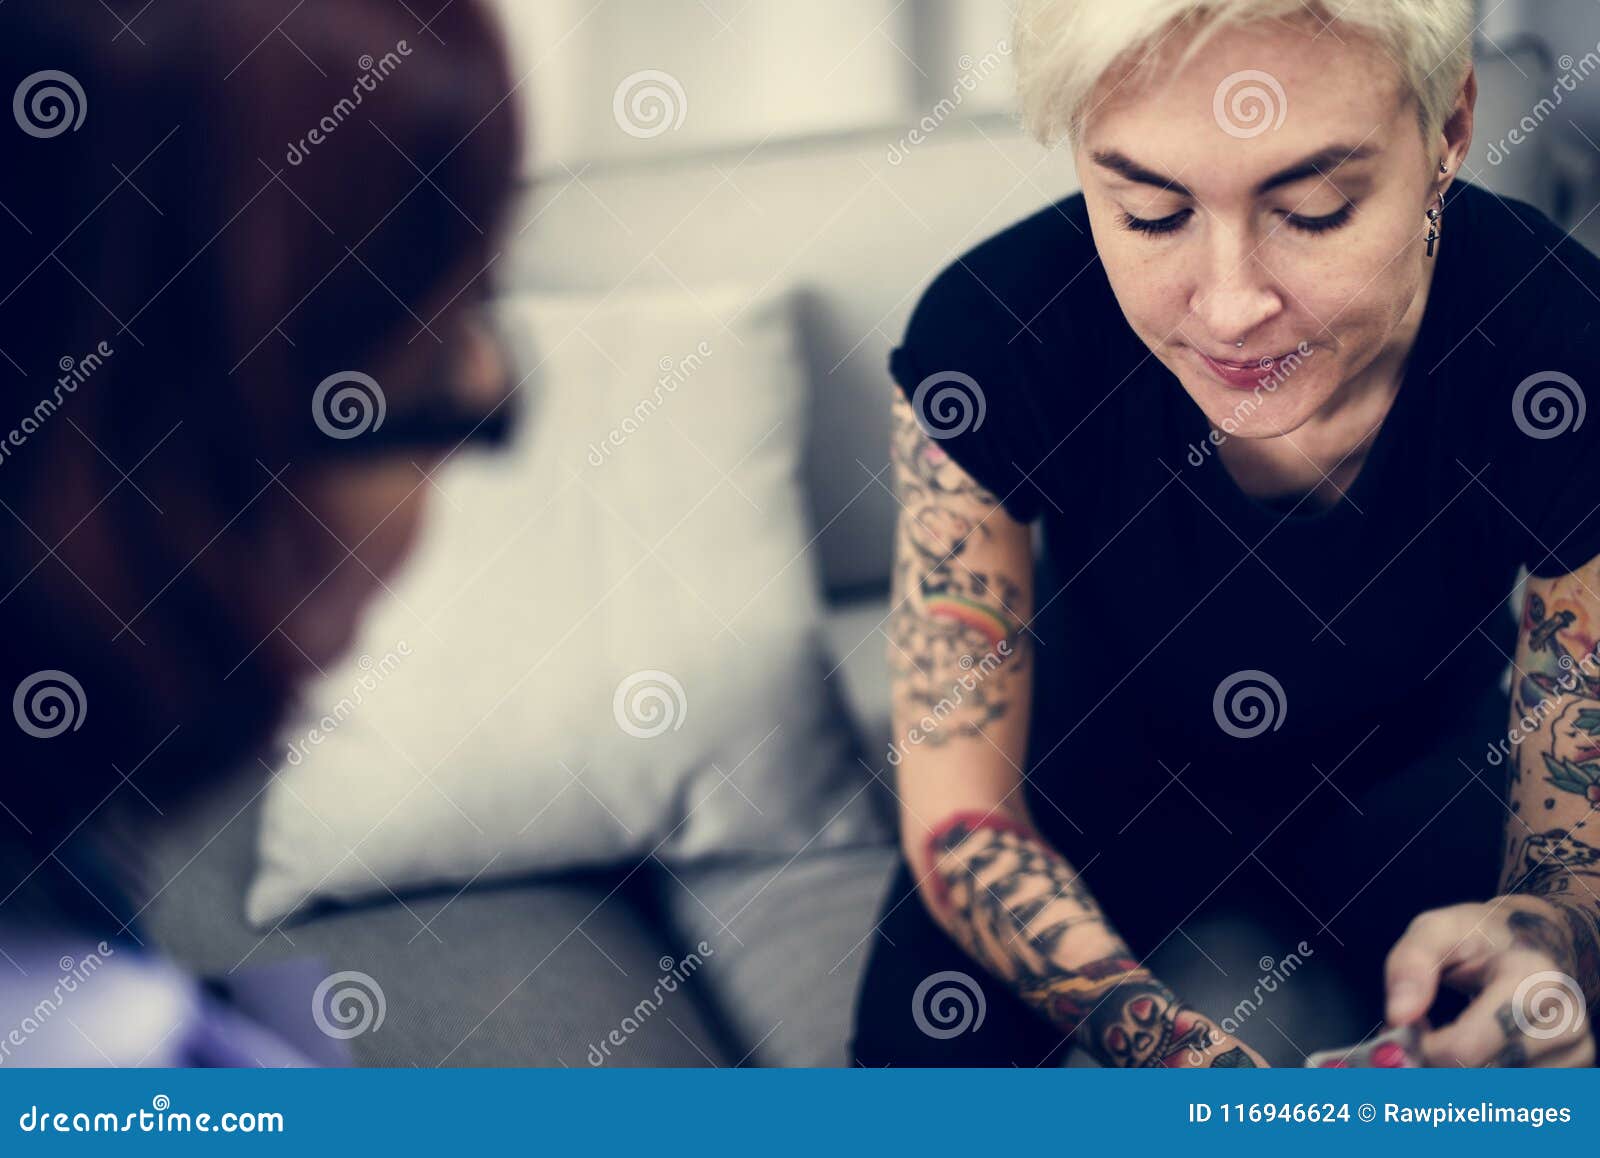 depressed woman having a counselling session